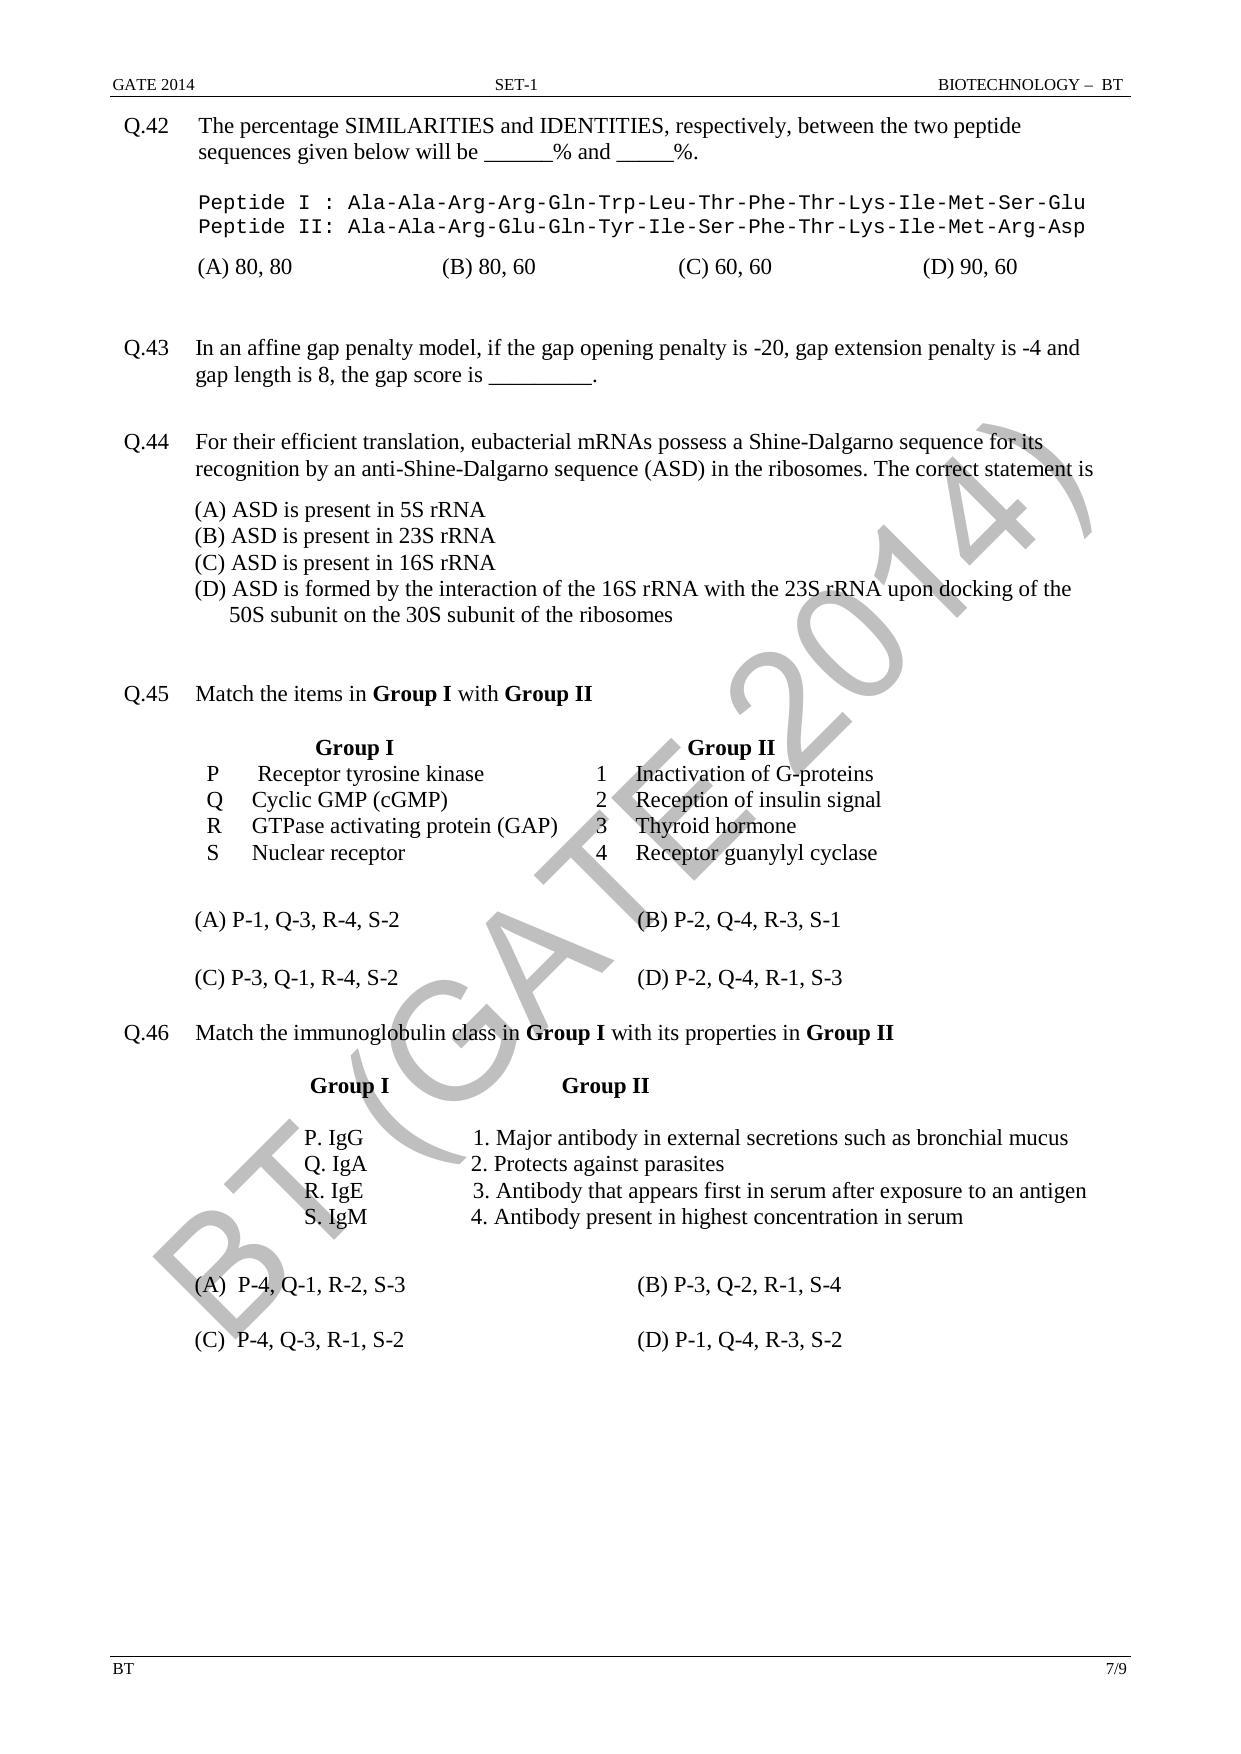 GATE 2014 Biotechnology (BT) Question Paper with Answer Key - Page 13